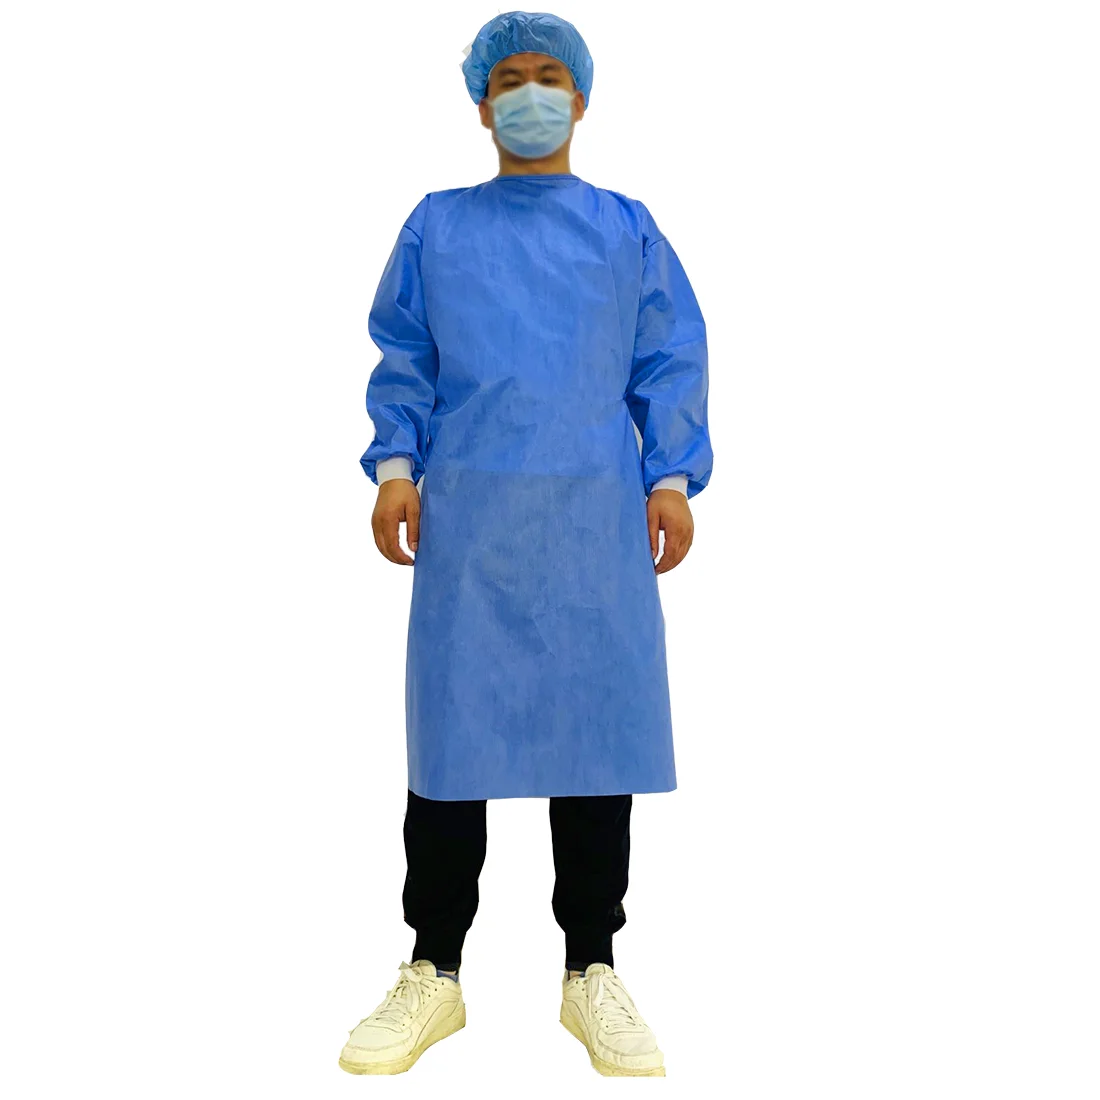 medical  breathable  safety caring  blue color DISPOSABLE  SMS  Surgical PPE Gown for  health care